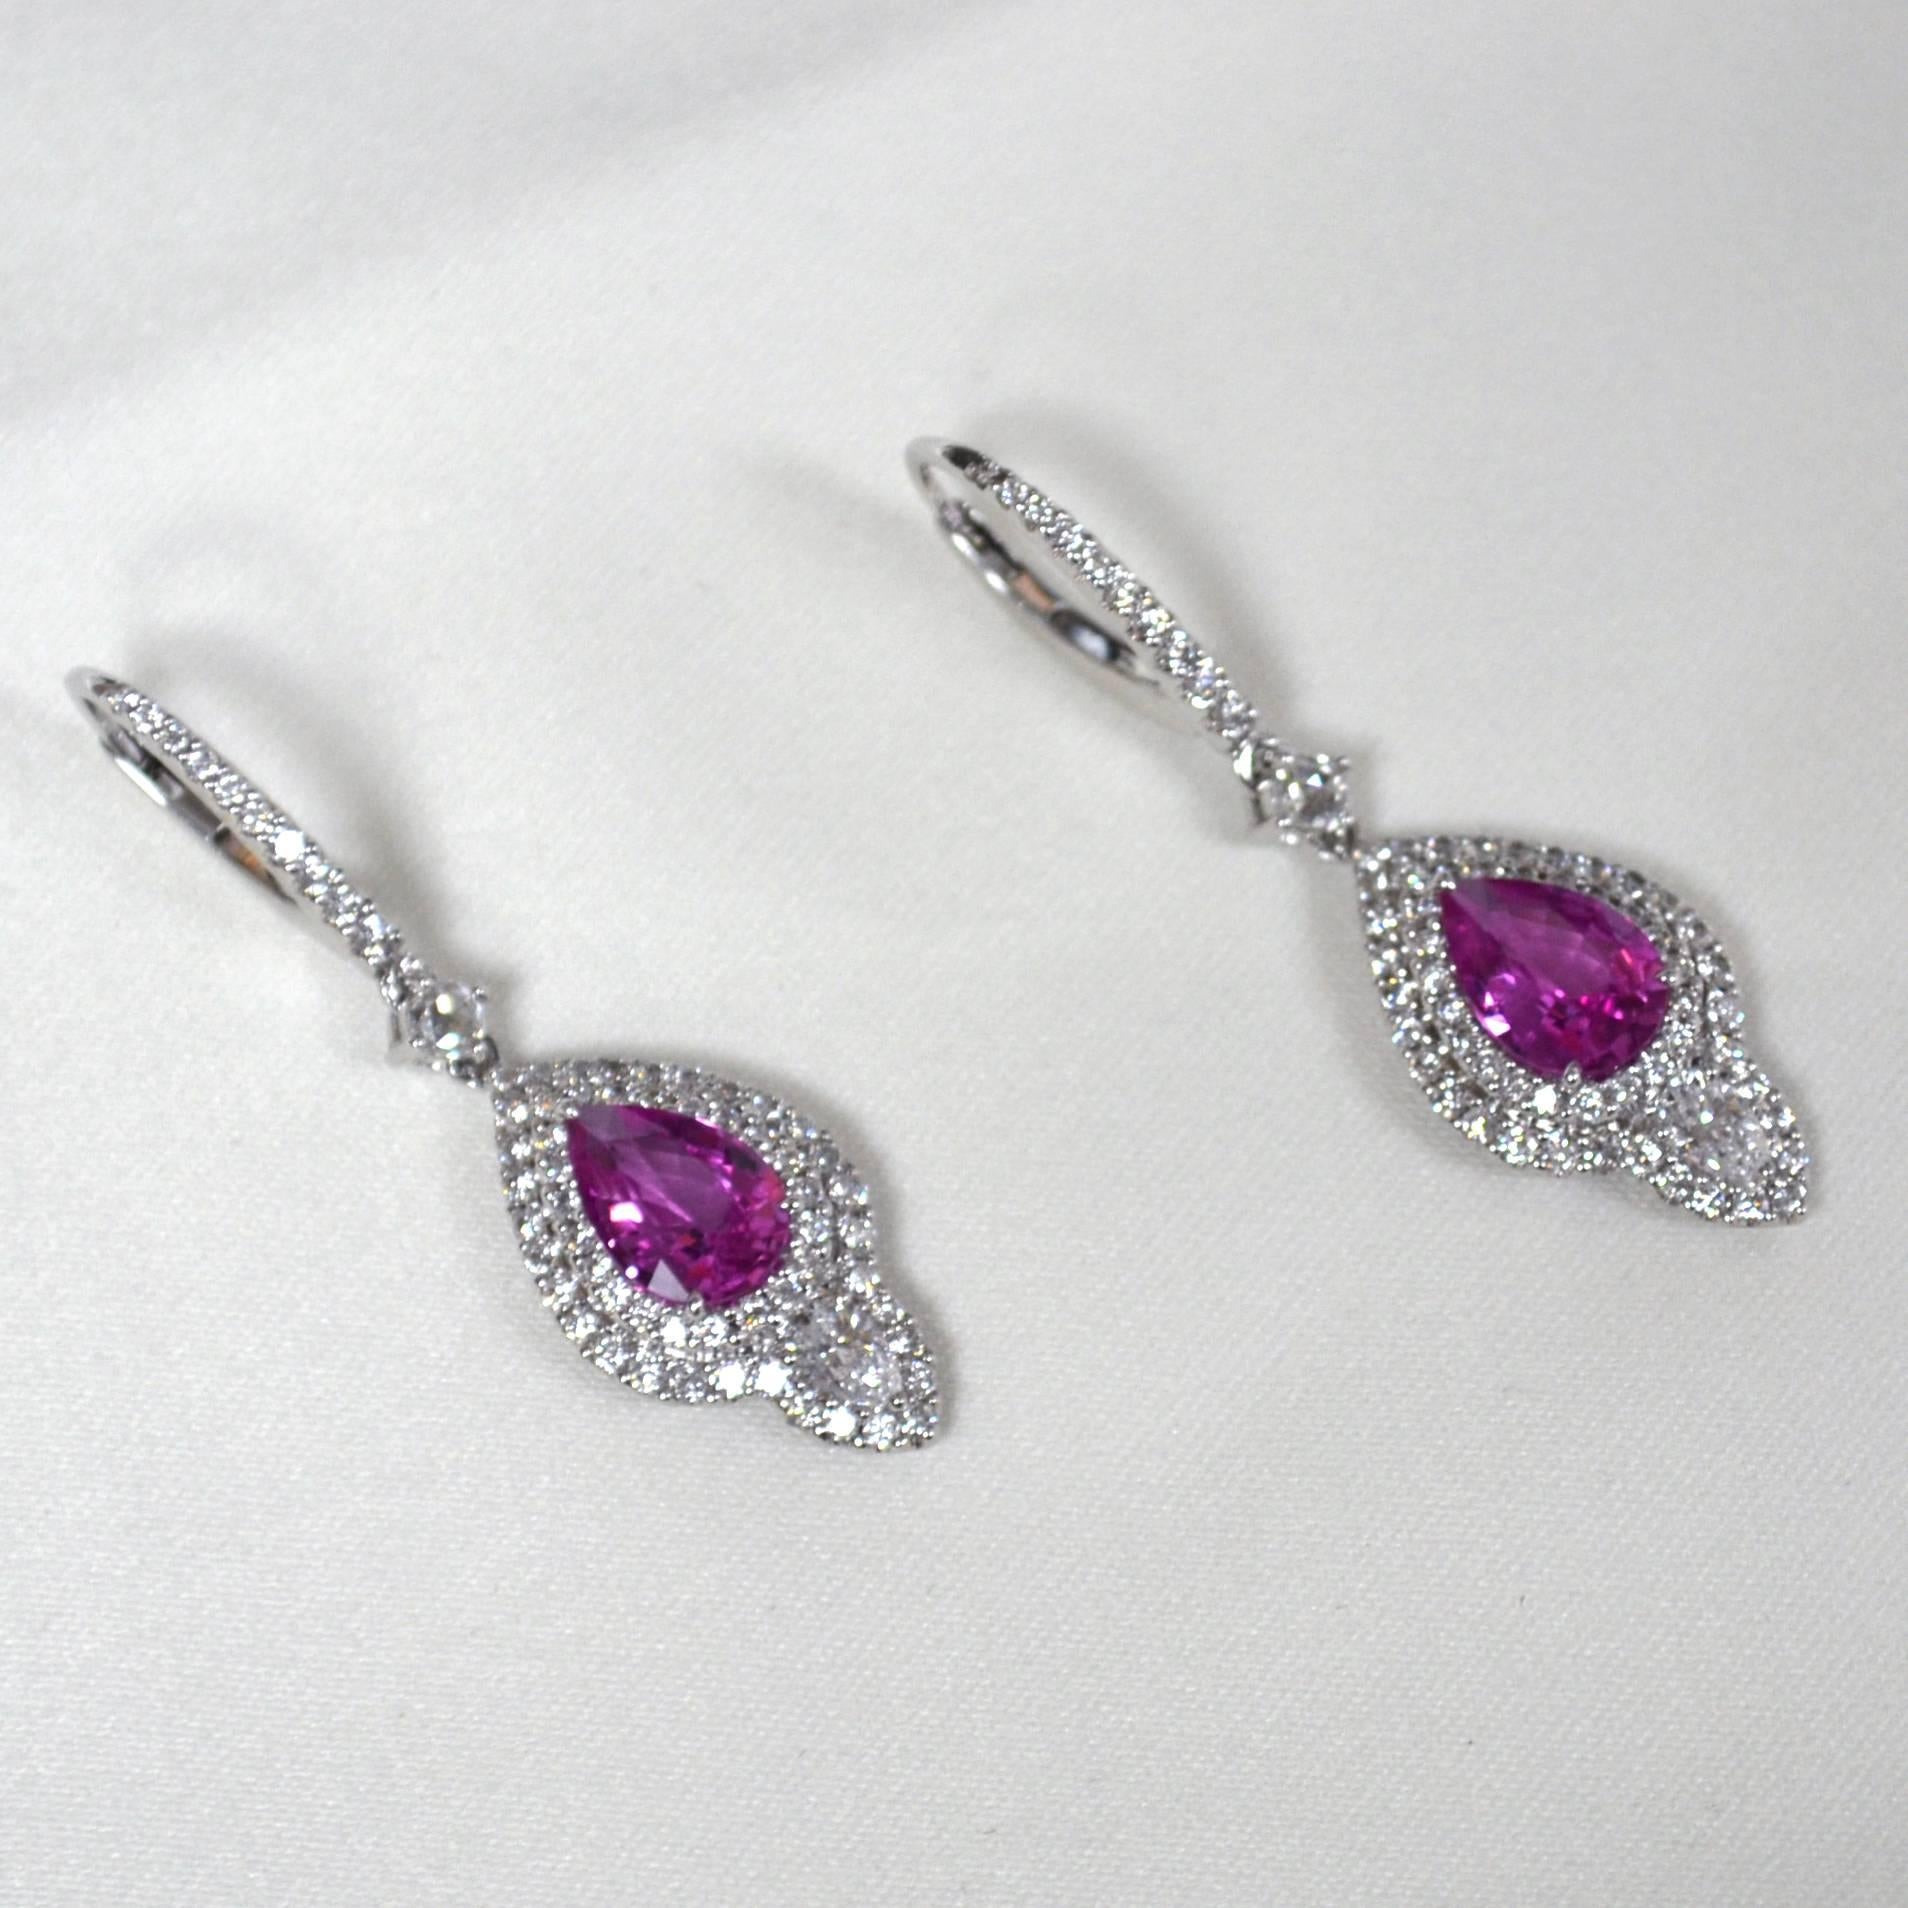 Earrings with lever back closures in 18 karat white gold set with 2 pear-shaped 9x6 mm Madagascar Pink Sapphires (2.55 carats), 2 pear-shaped Diamonds (0.35 carats), and 130 round brilliant-cut Diamonds (1.17 carats).
